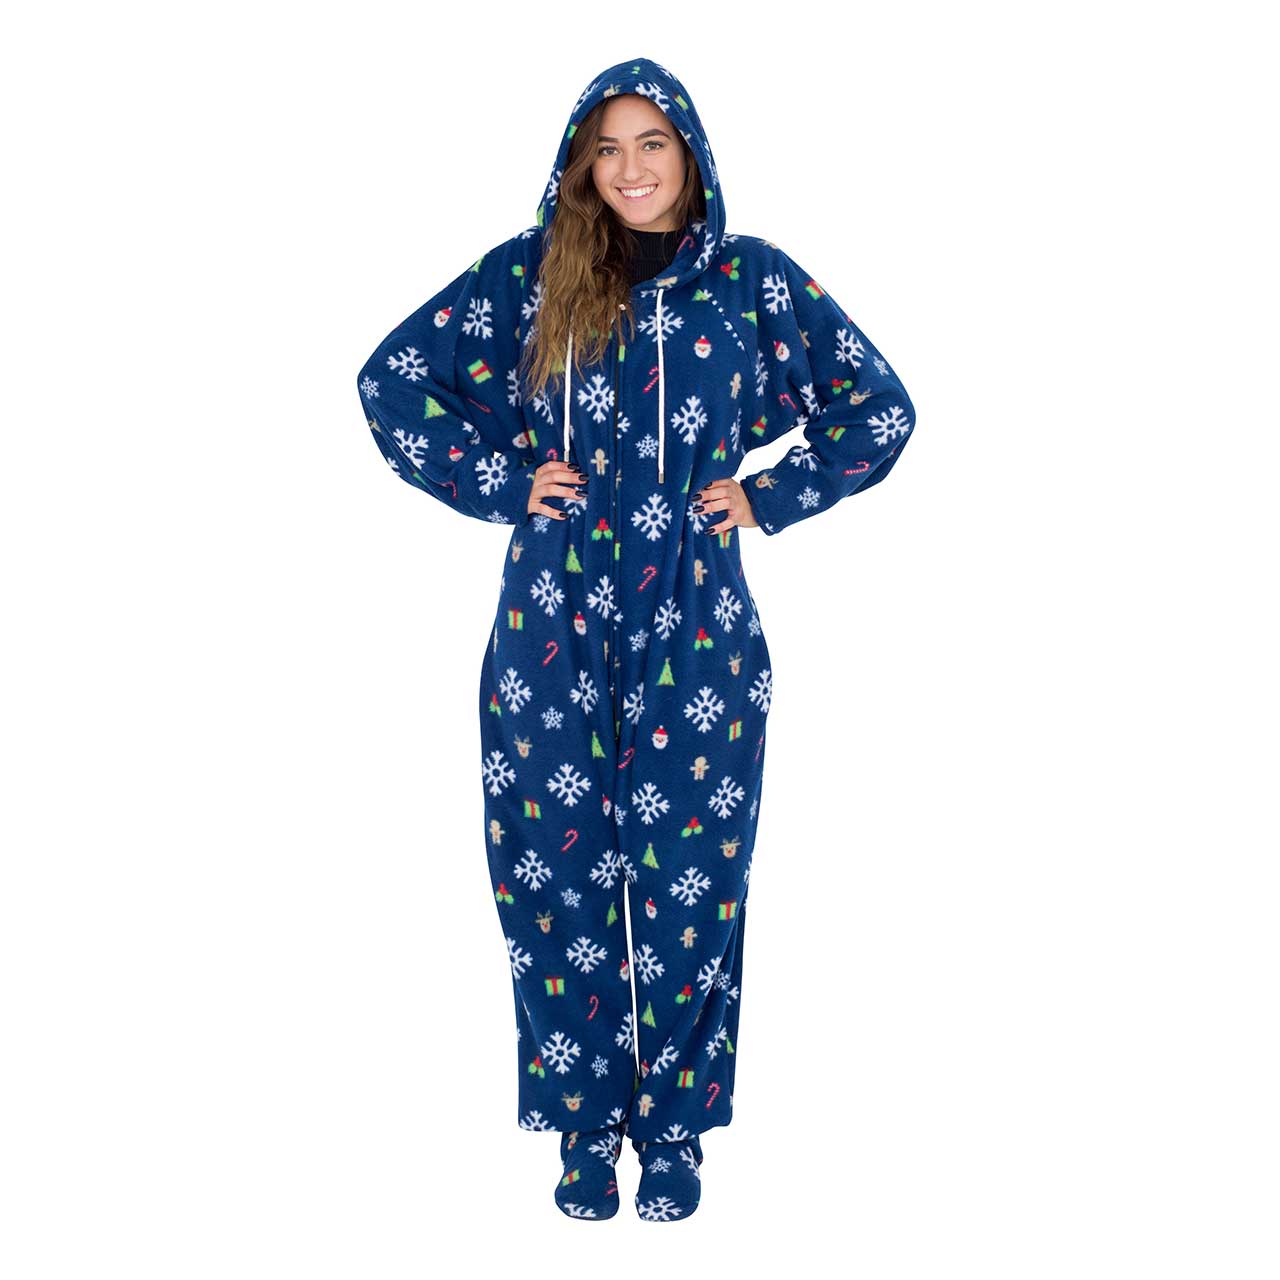 Snowflakes and Reindeer Navy Ugly Christmas Pajama Suit with Hood,Specials : uglyschristmassweater.com